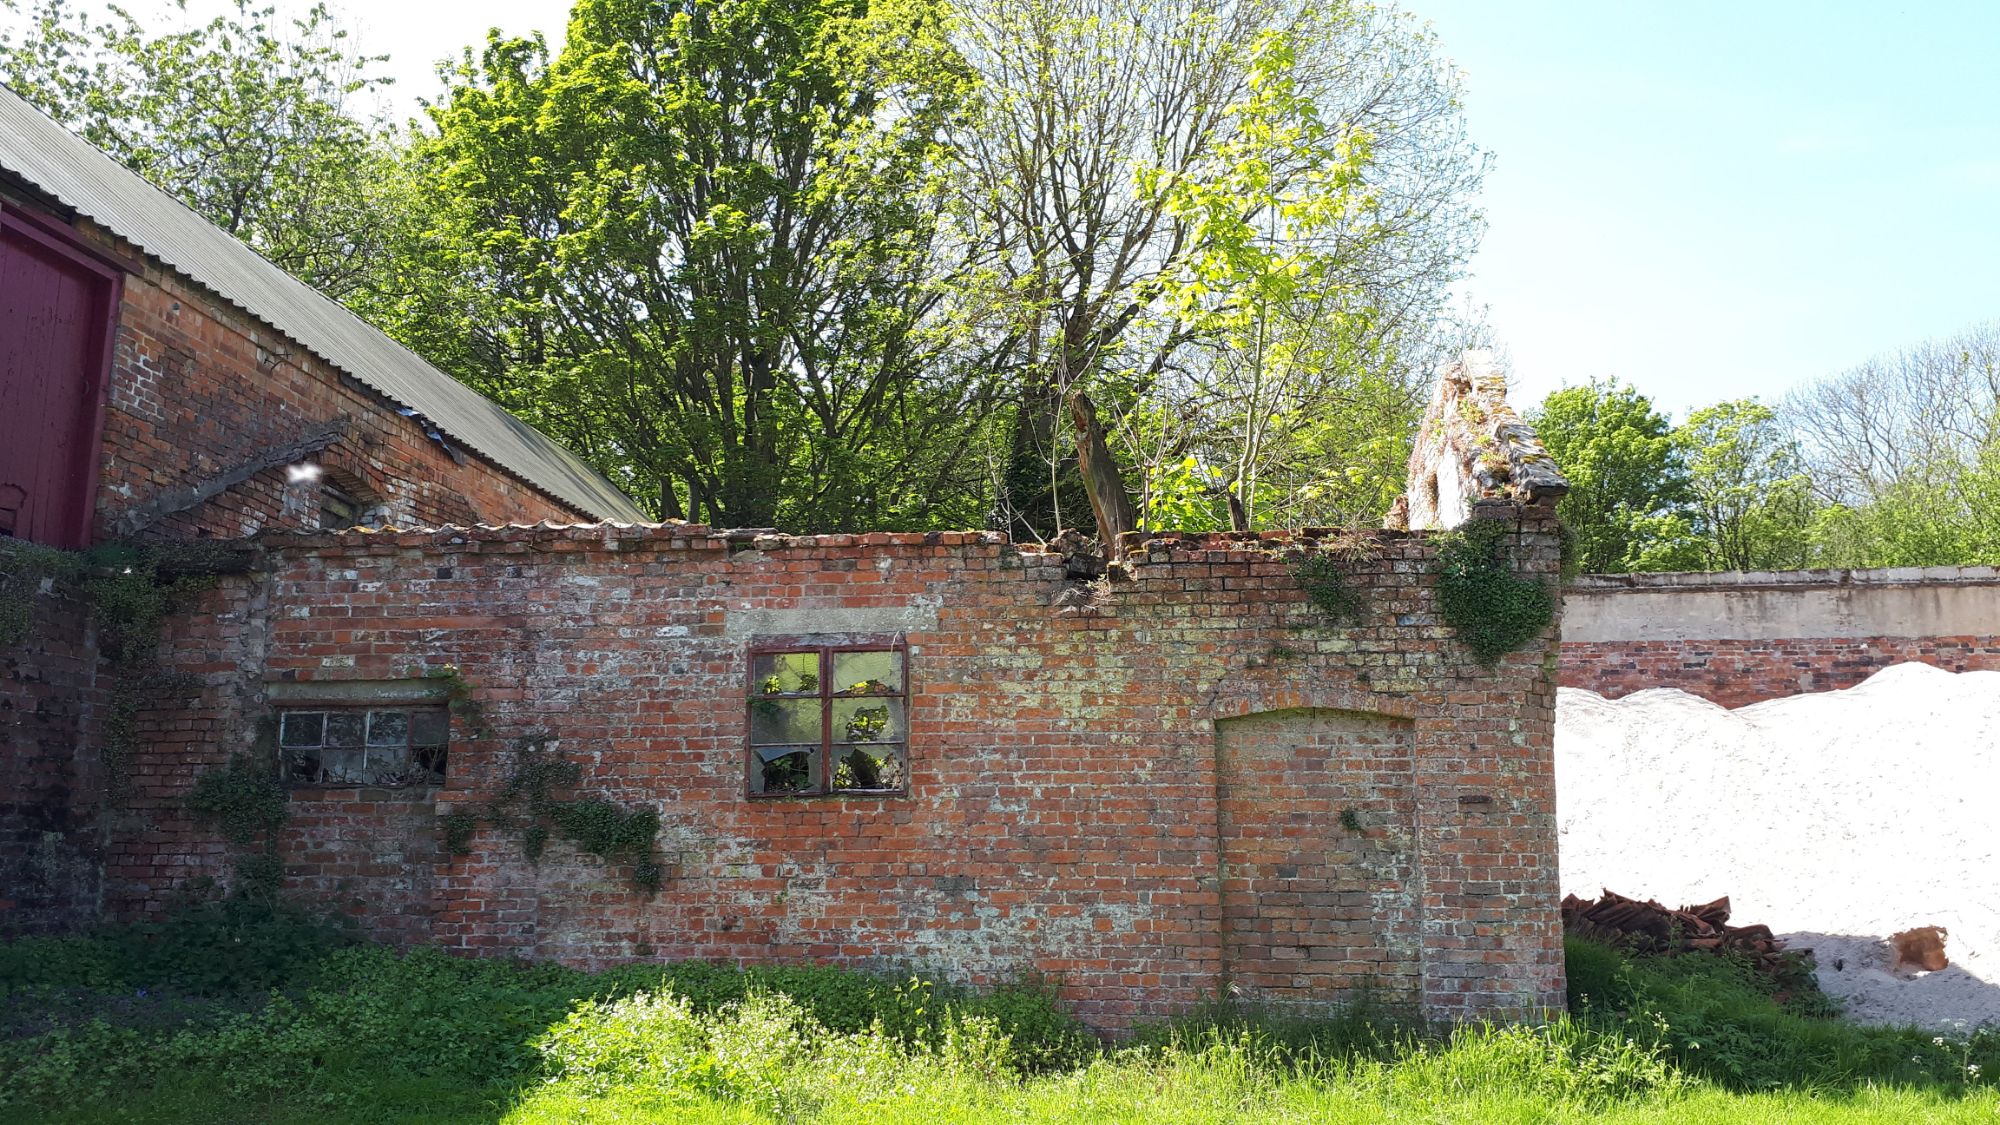 Planning Permission and Renovation Project near Lincoln